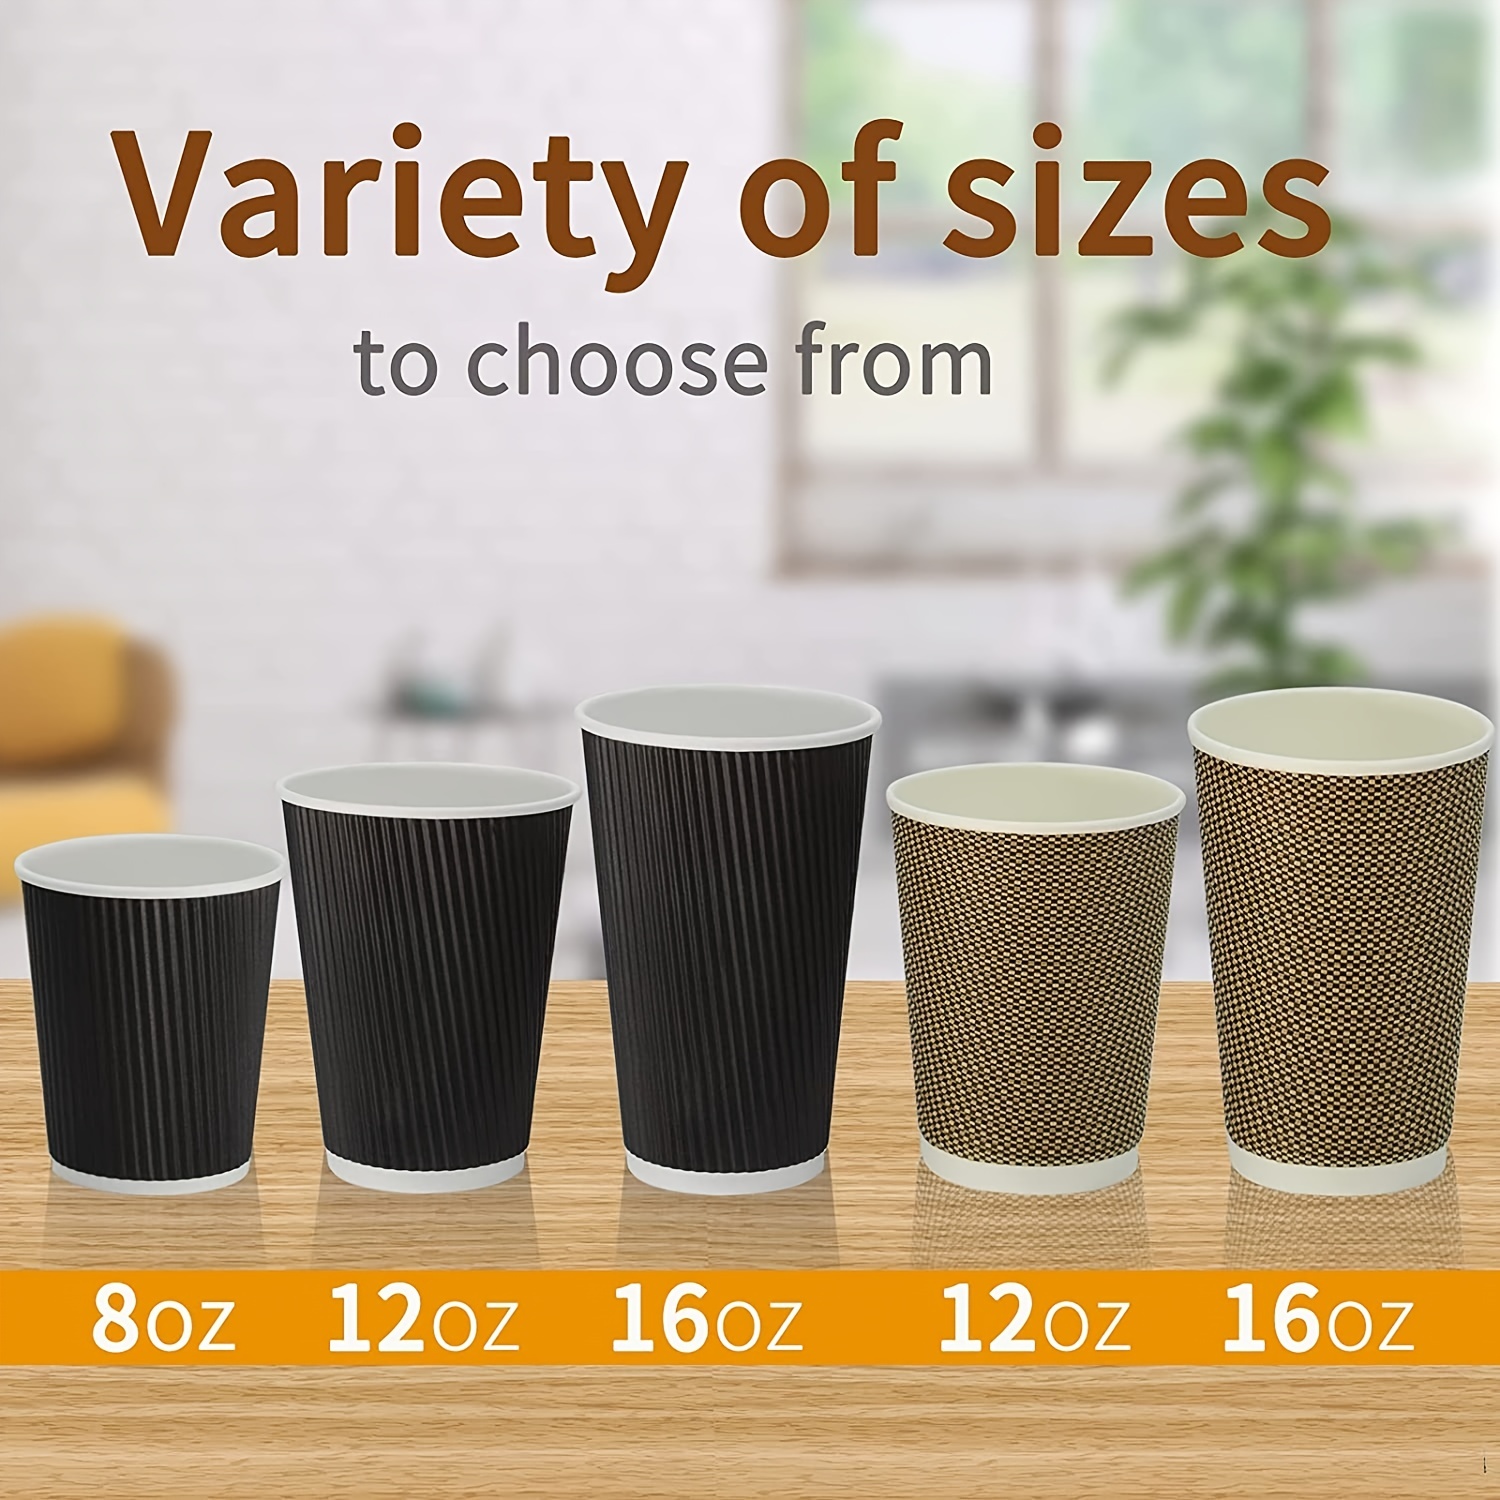 16 Oz. Double Wall Insulated Paper Cup (Petite Line) - ICF16S - IdeaStage  Promotional Products